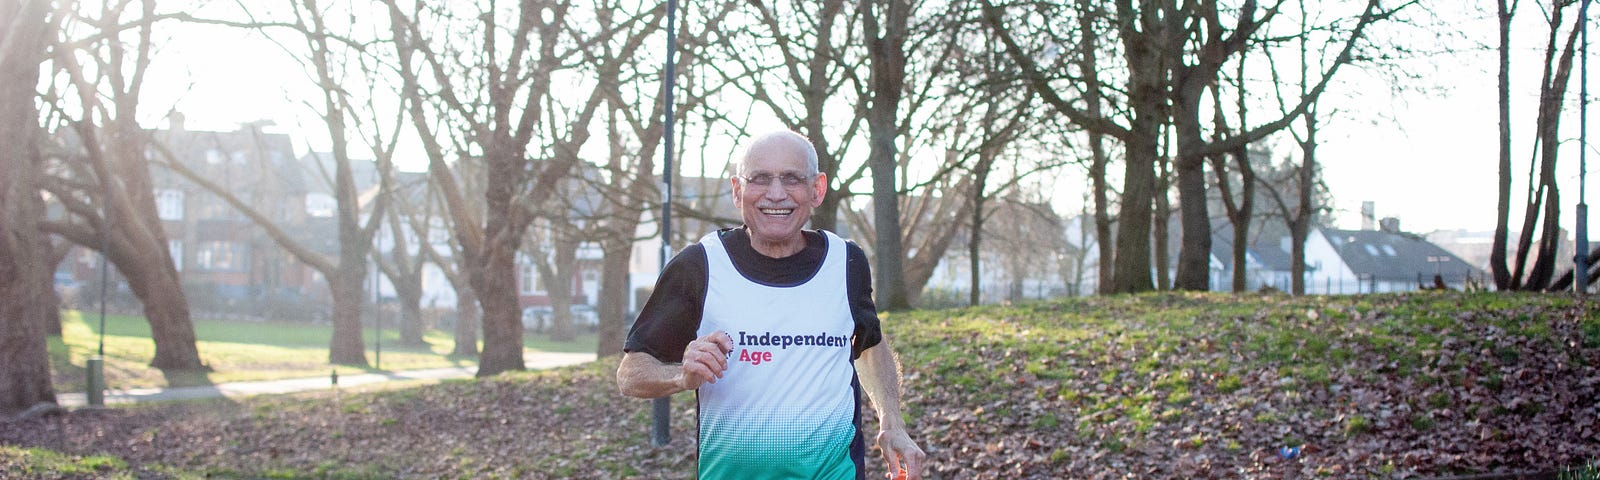 Older man running in park wearing training vest with Independent Age logo